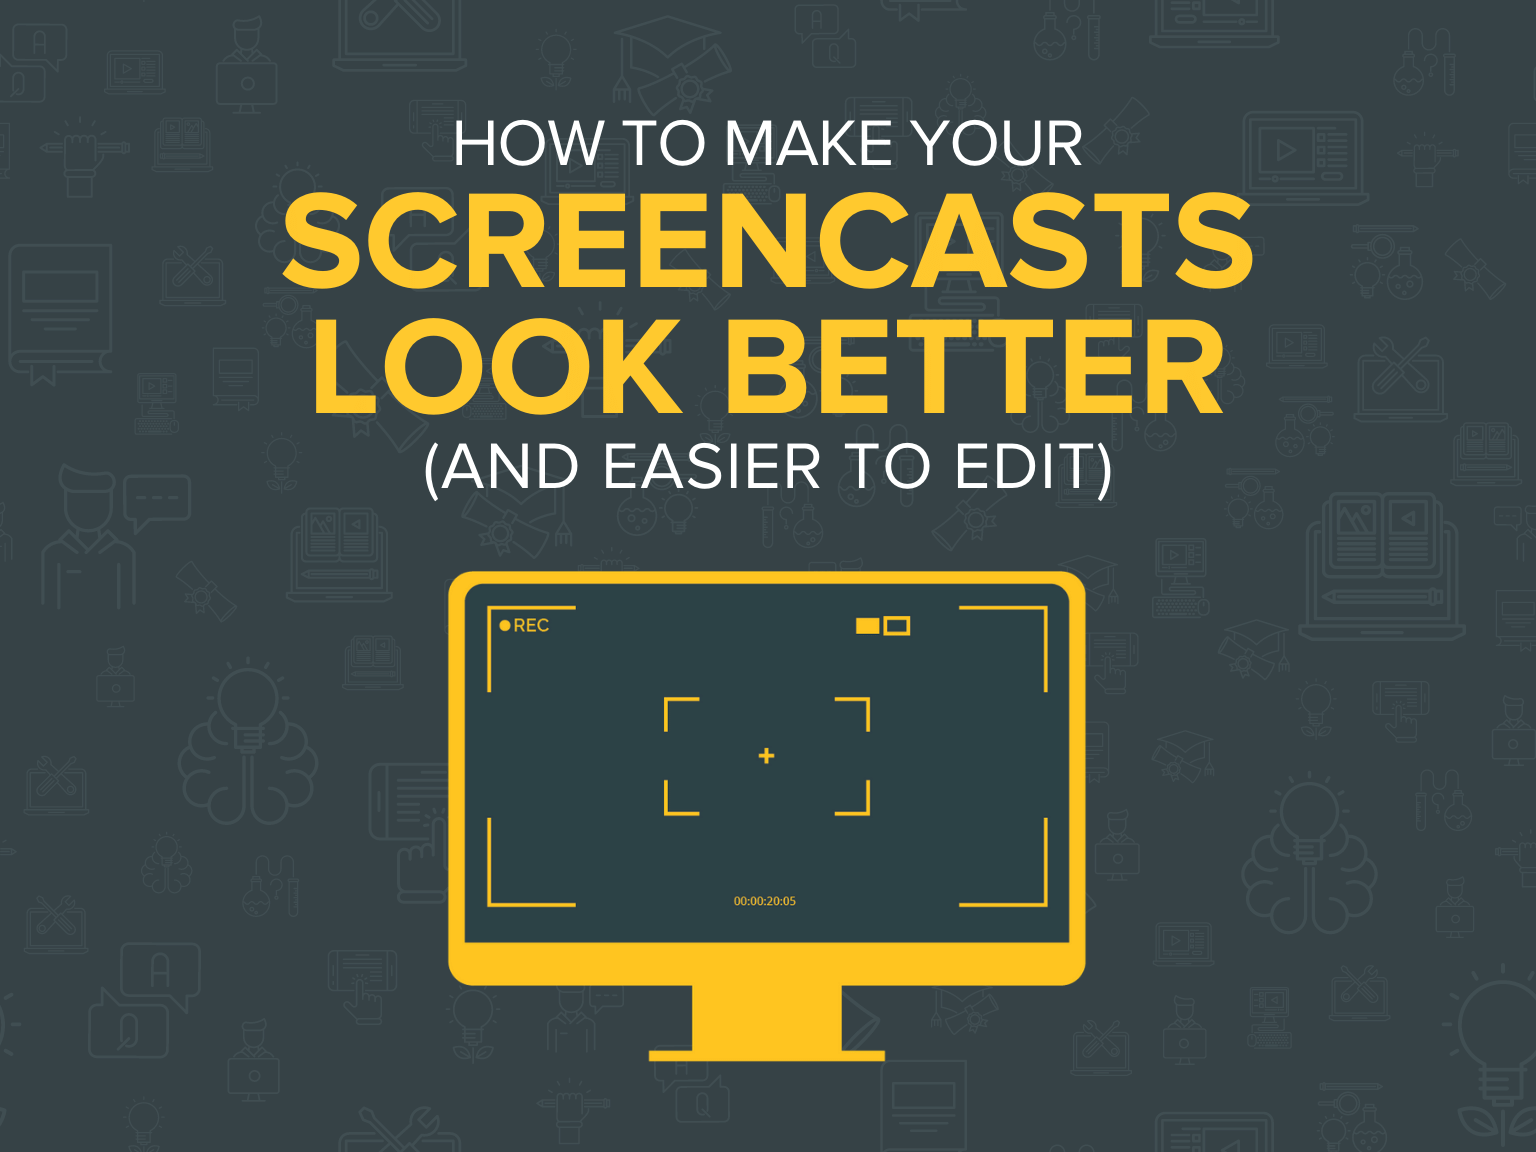 How to make your screencasts look better (and easier to edit)